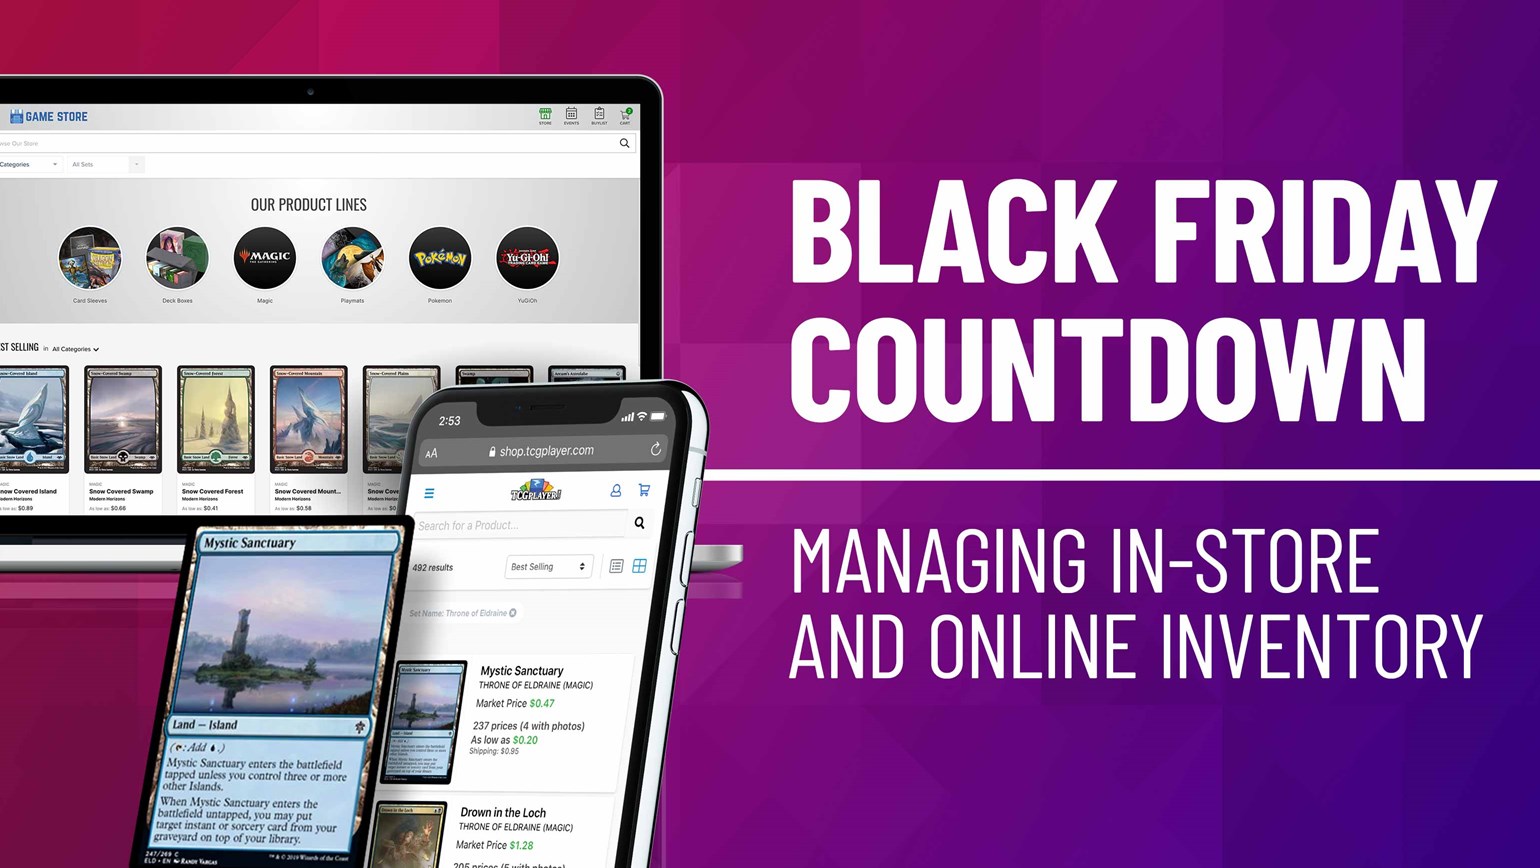 Black Friday Countdown: Managing In-Store and Online Inventory